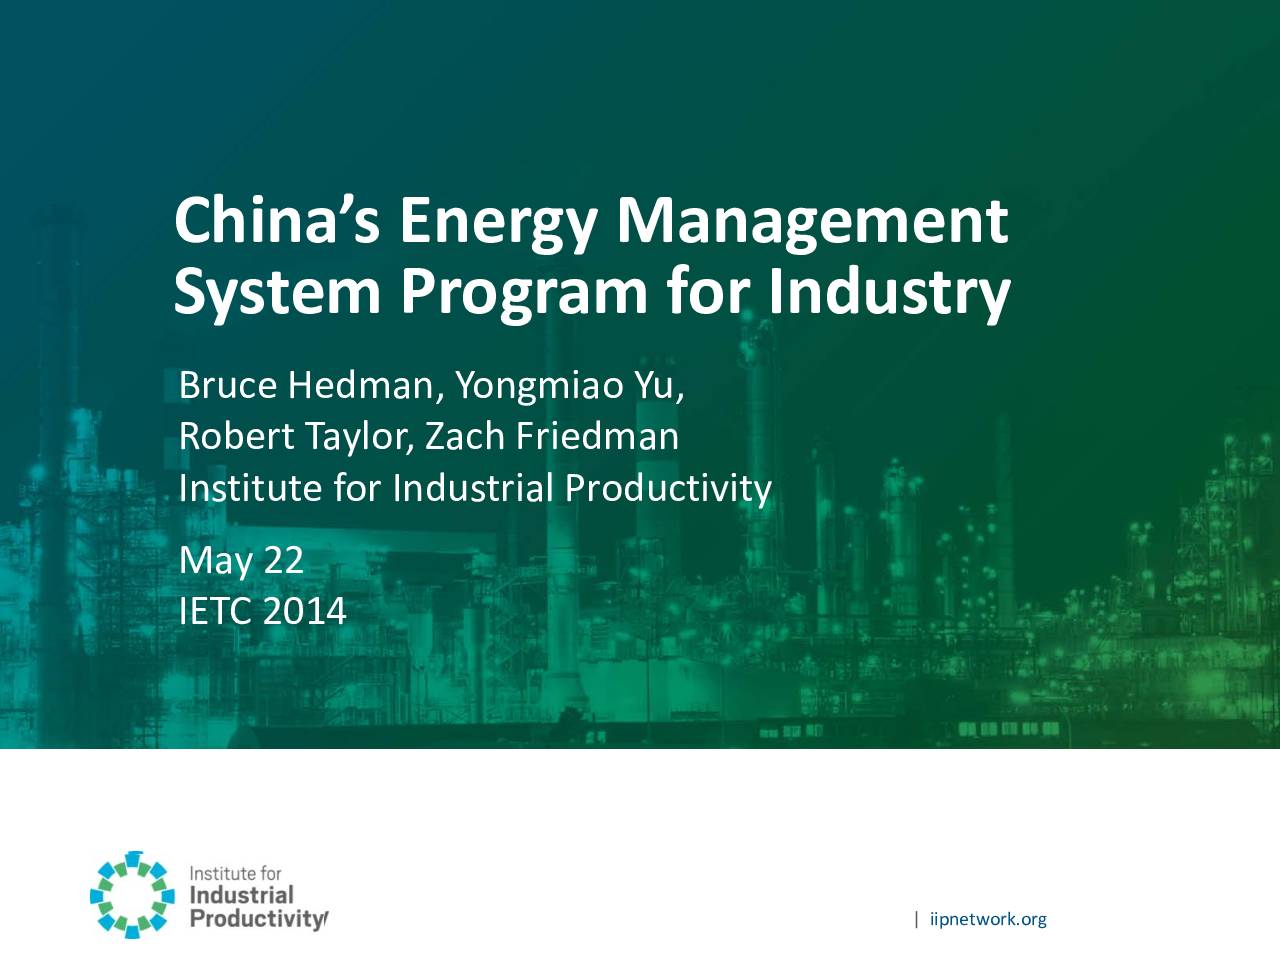 China’s Energy Management System Program for Industry